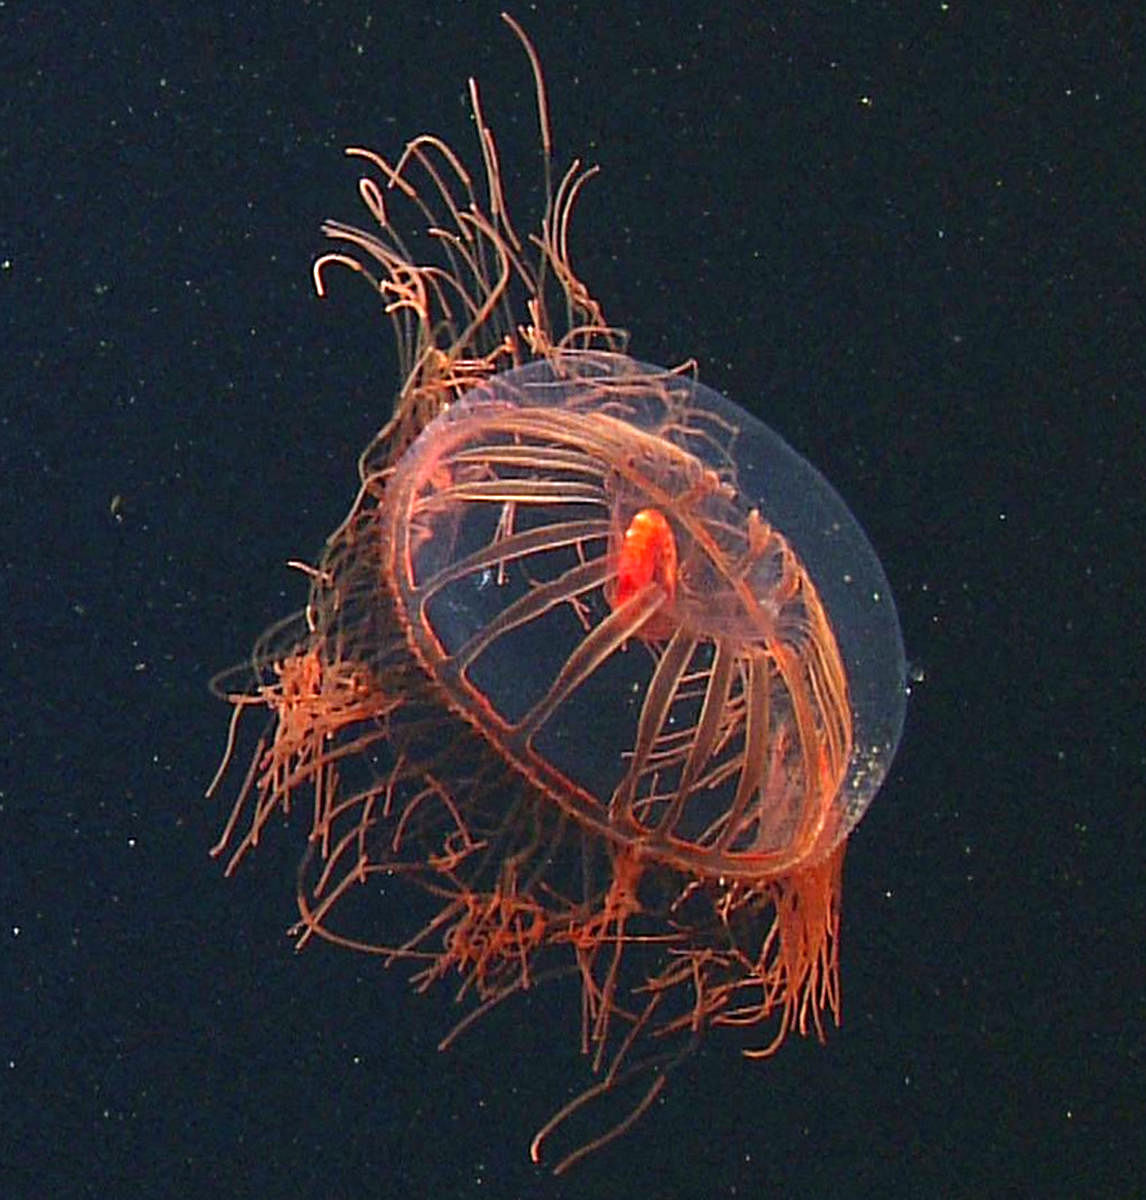 A medusa jelly (in pic) that has eaten a red mysid shrimp. Because many deep-sea animals have transparent bodies, researchers can sometimes identify prey even after they have been ingested. PHOTO CREDIT: MBARI via NYT